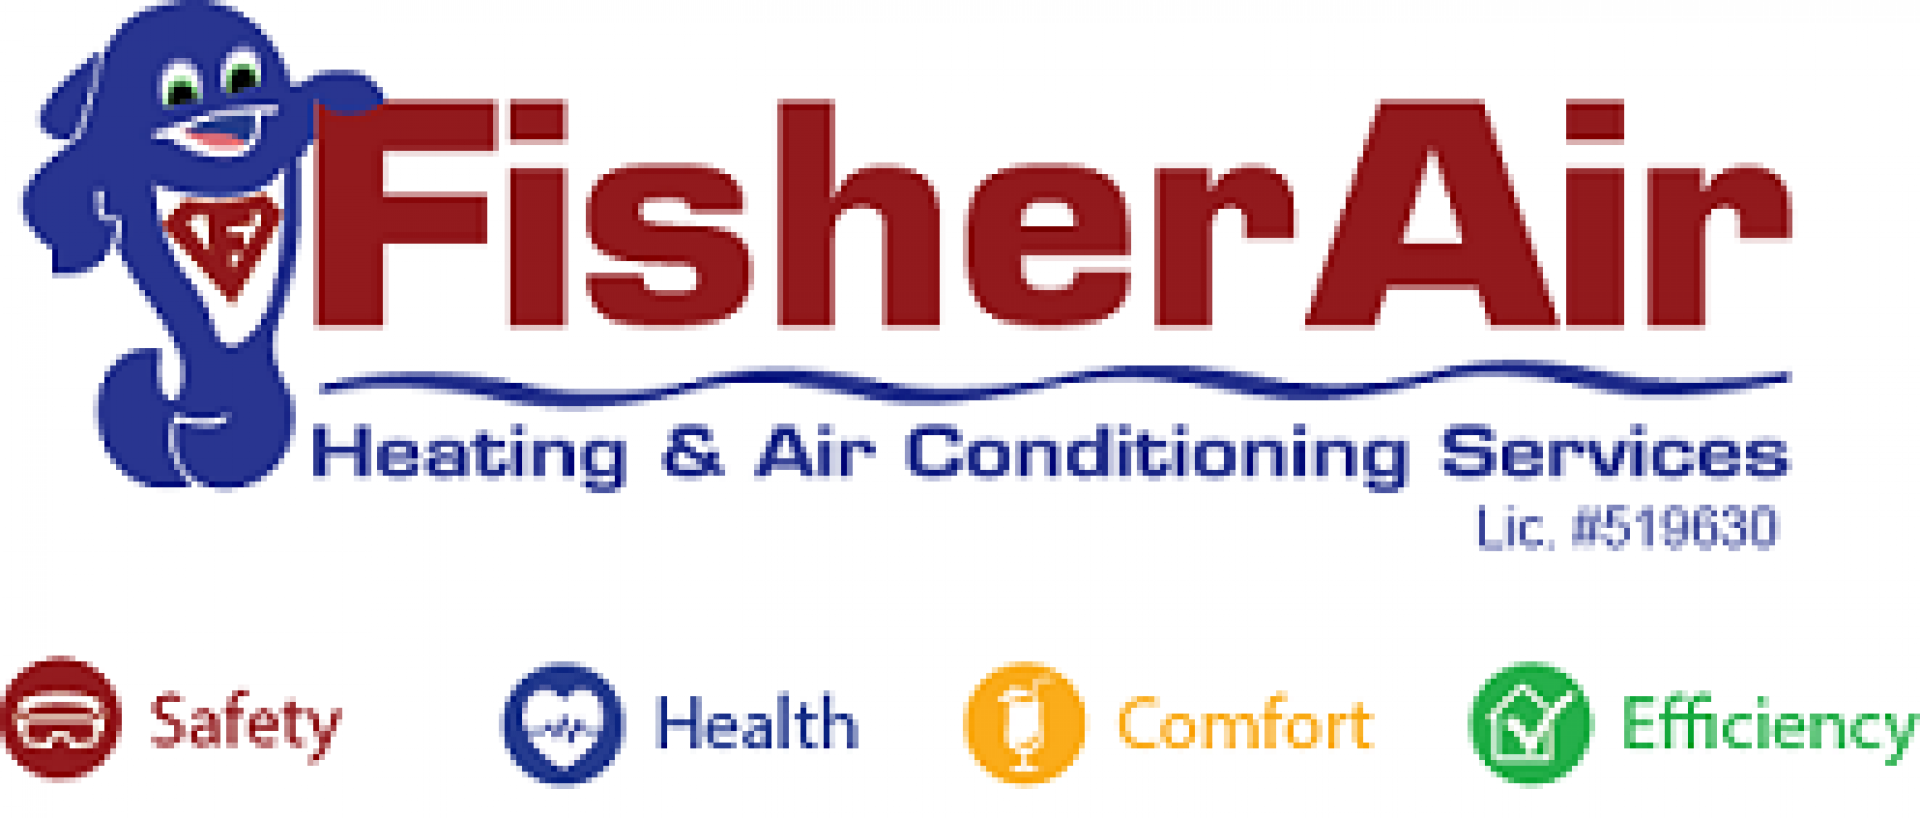 FisherAir Heating and Air Conditioning Services company logo